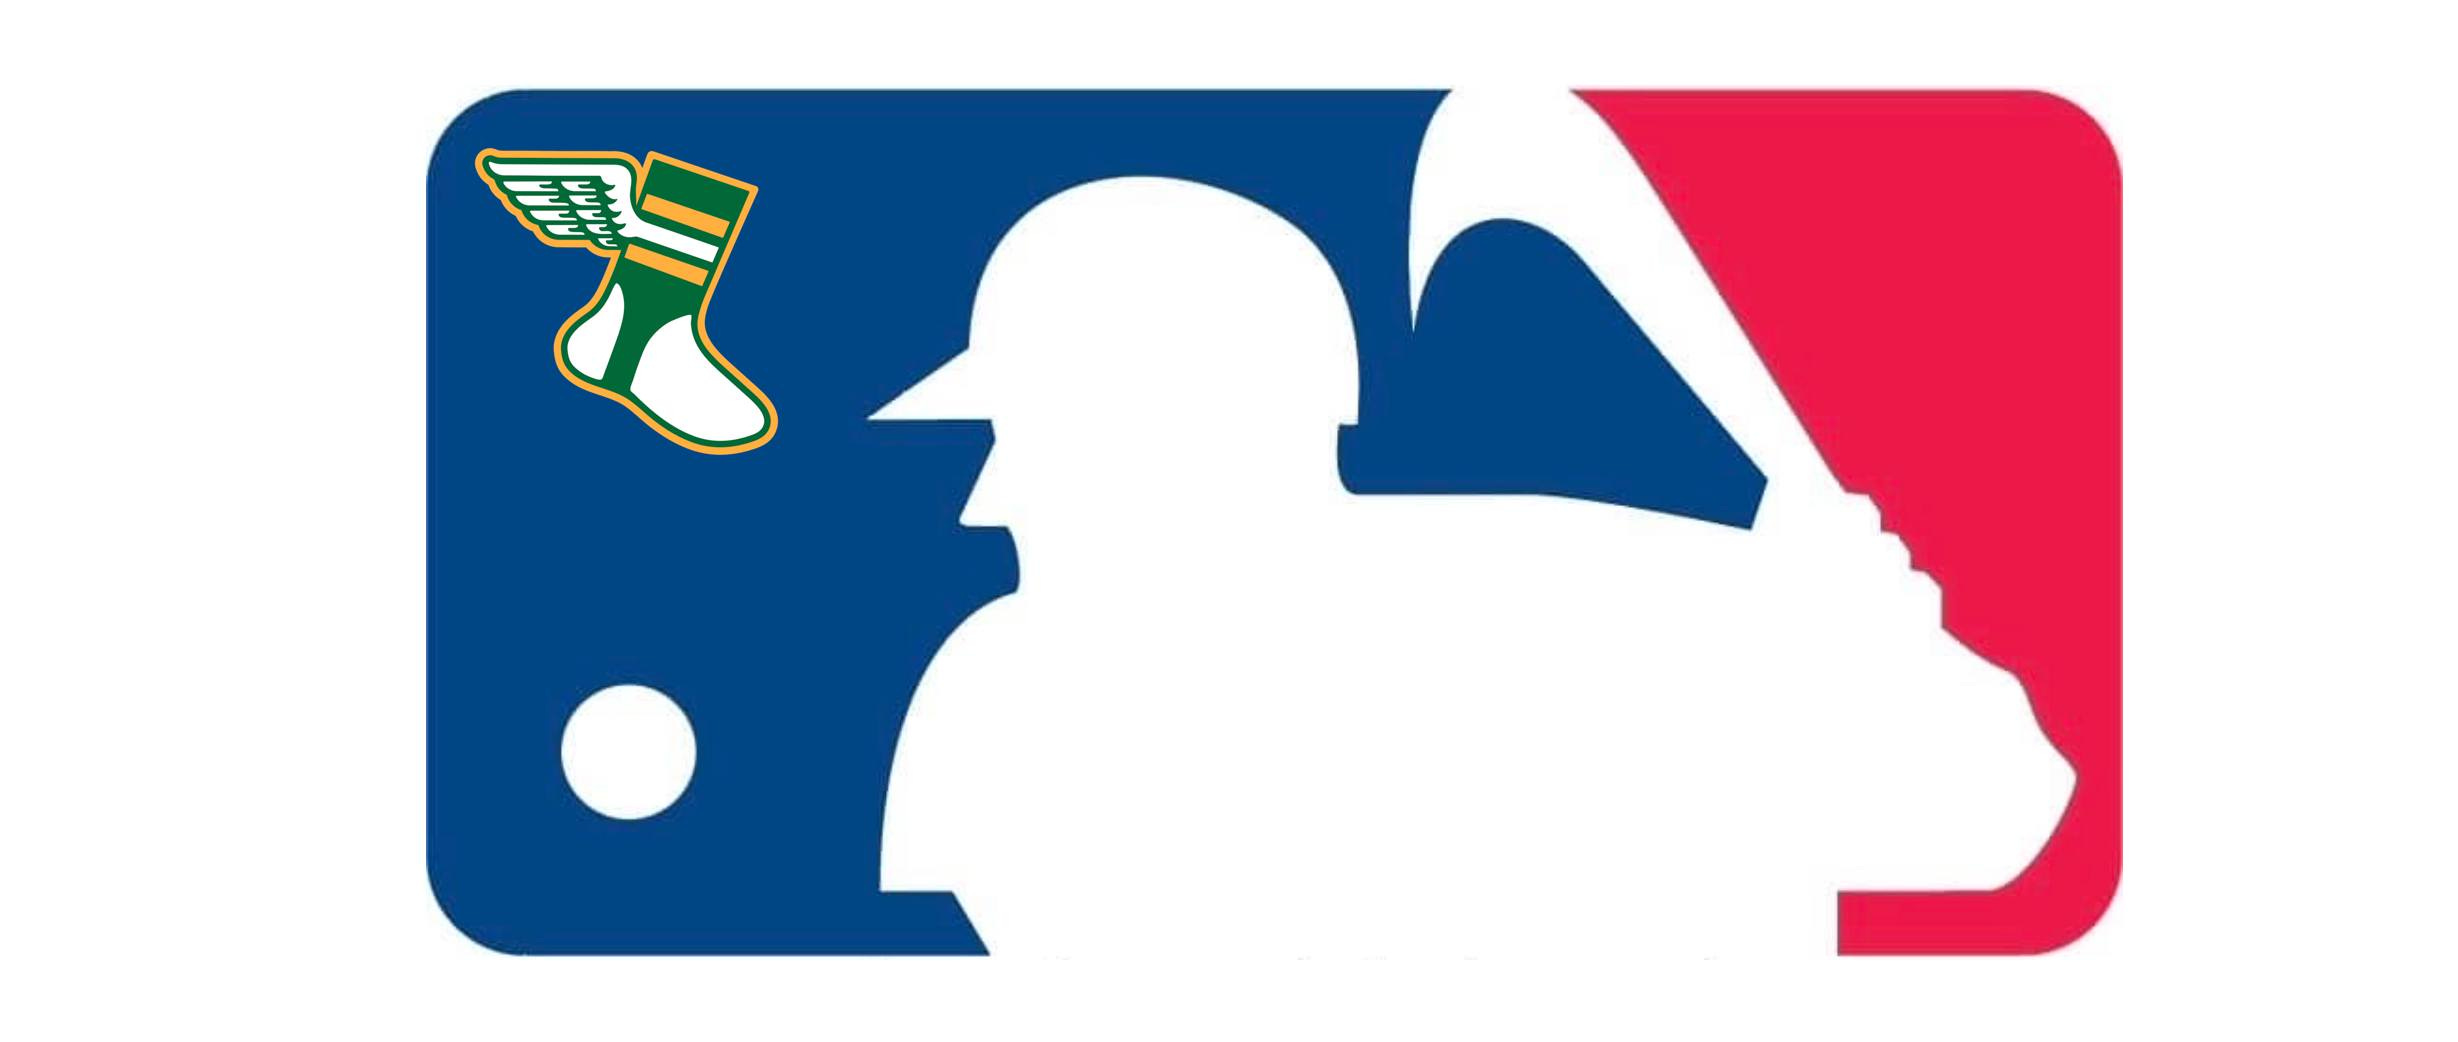 This week in uniforms and logos: MLB's new BP uniforms and caps